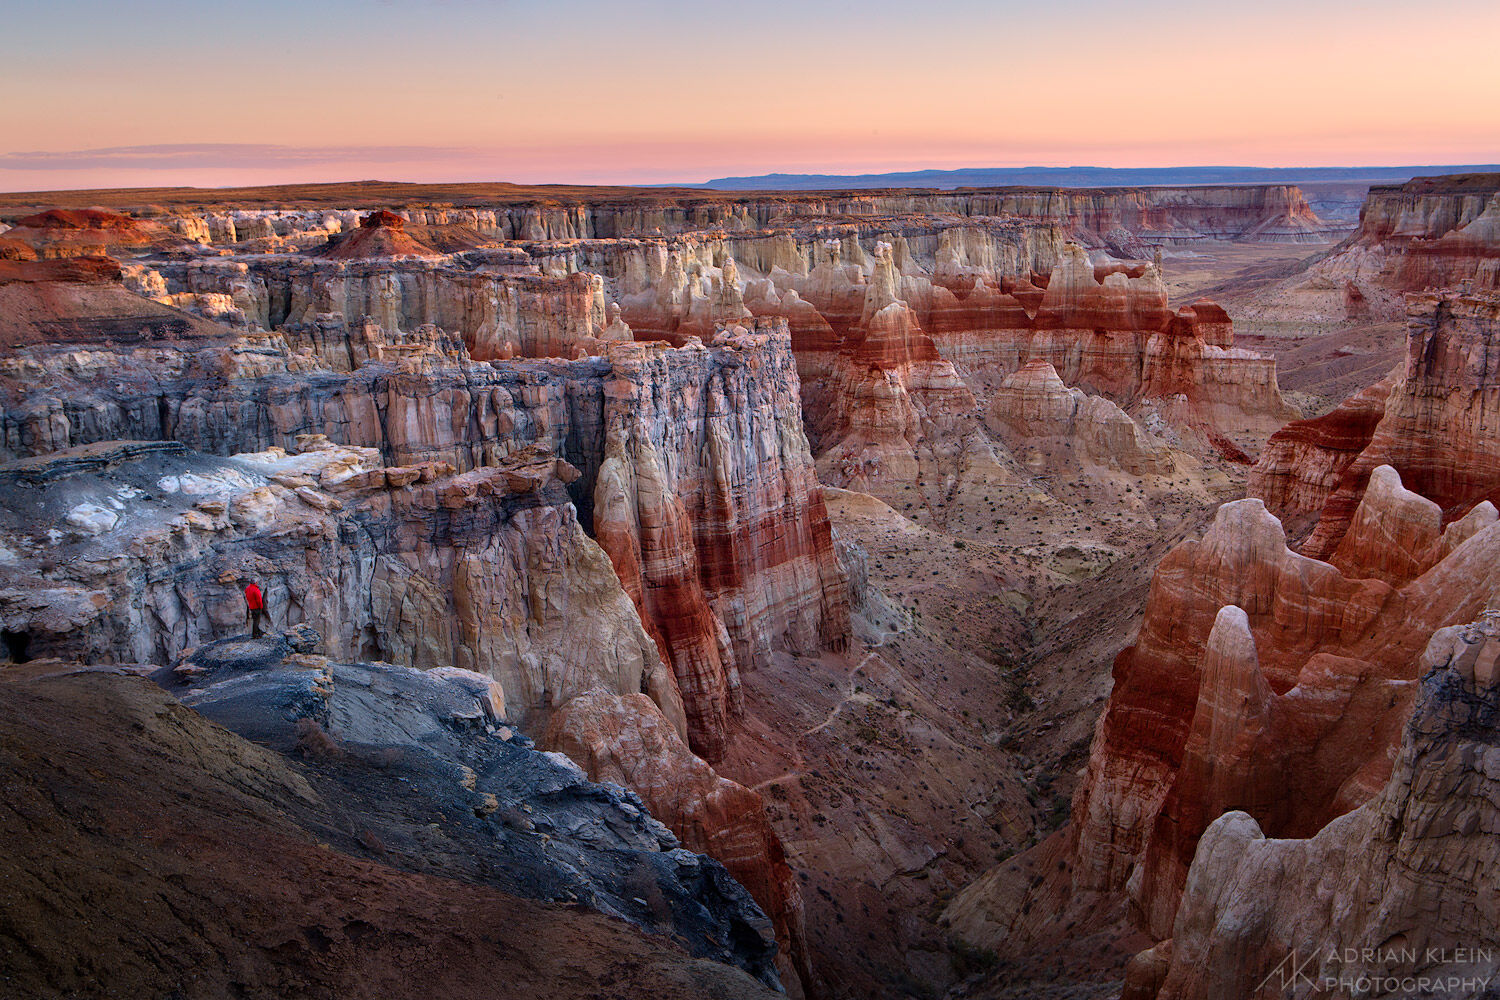 My friend David stands along the cliff edge watching the sunrise at Coal Mine Canyon, Arizona.